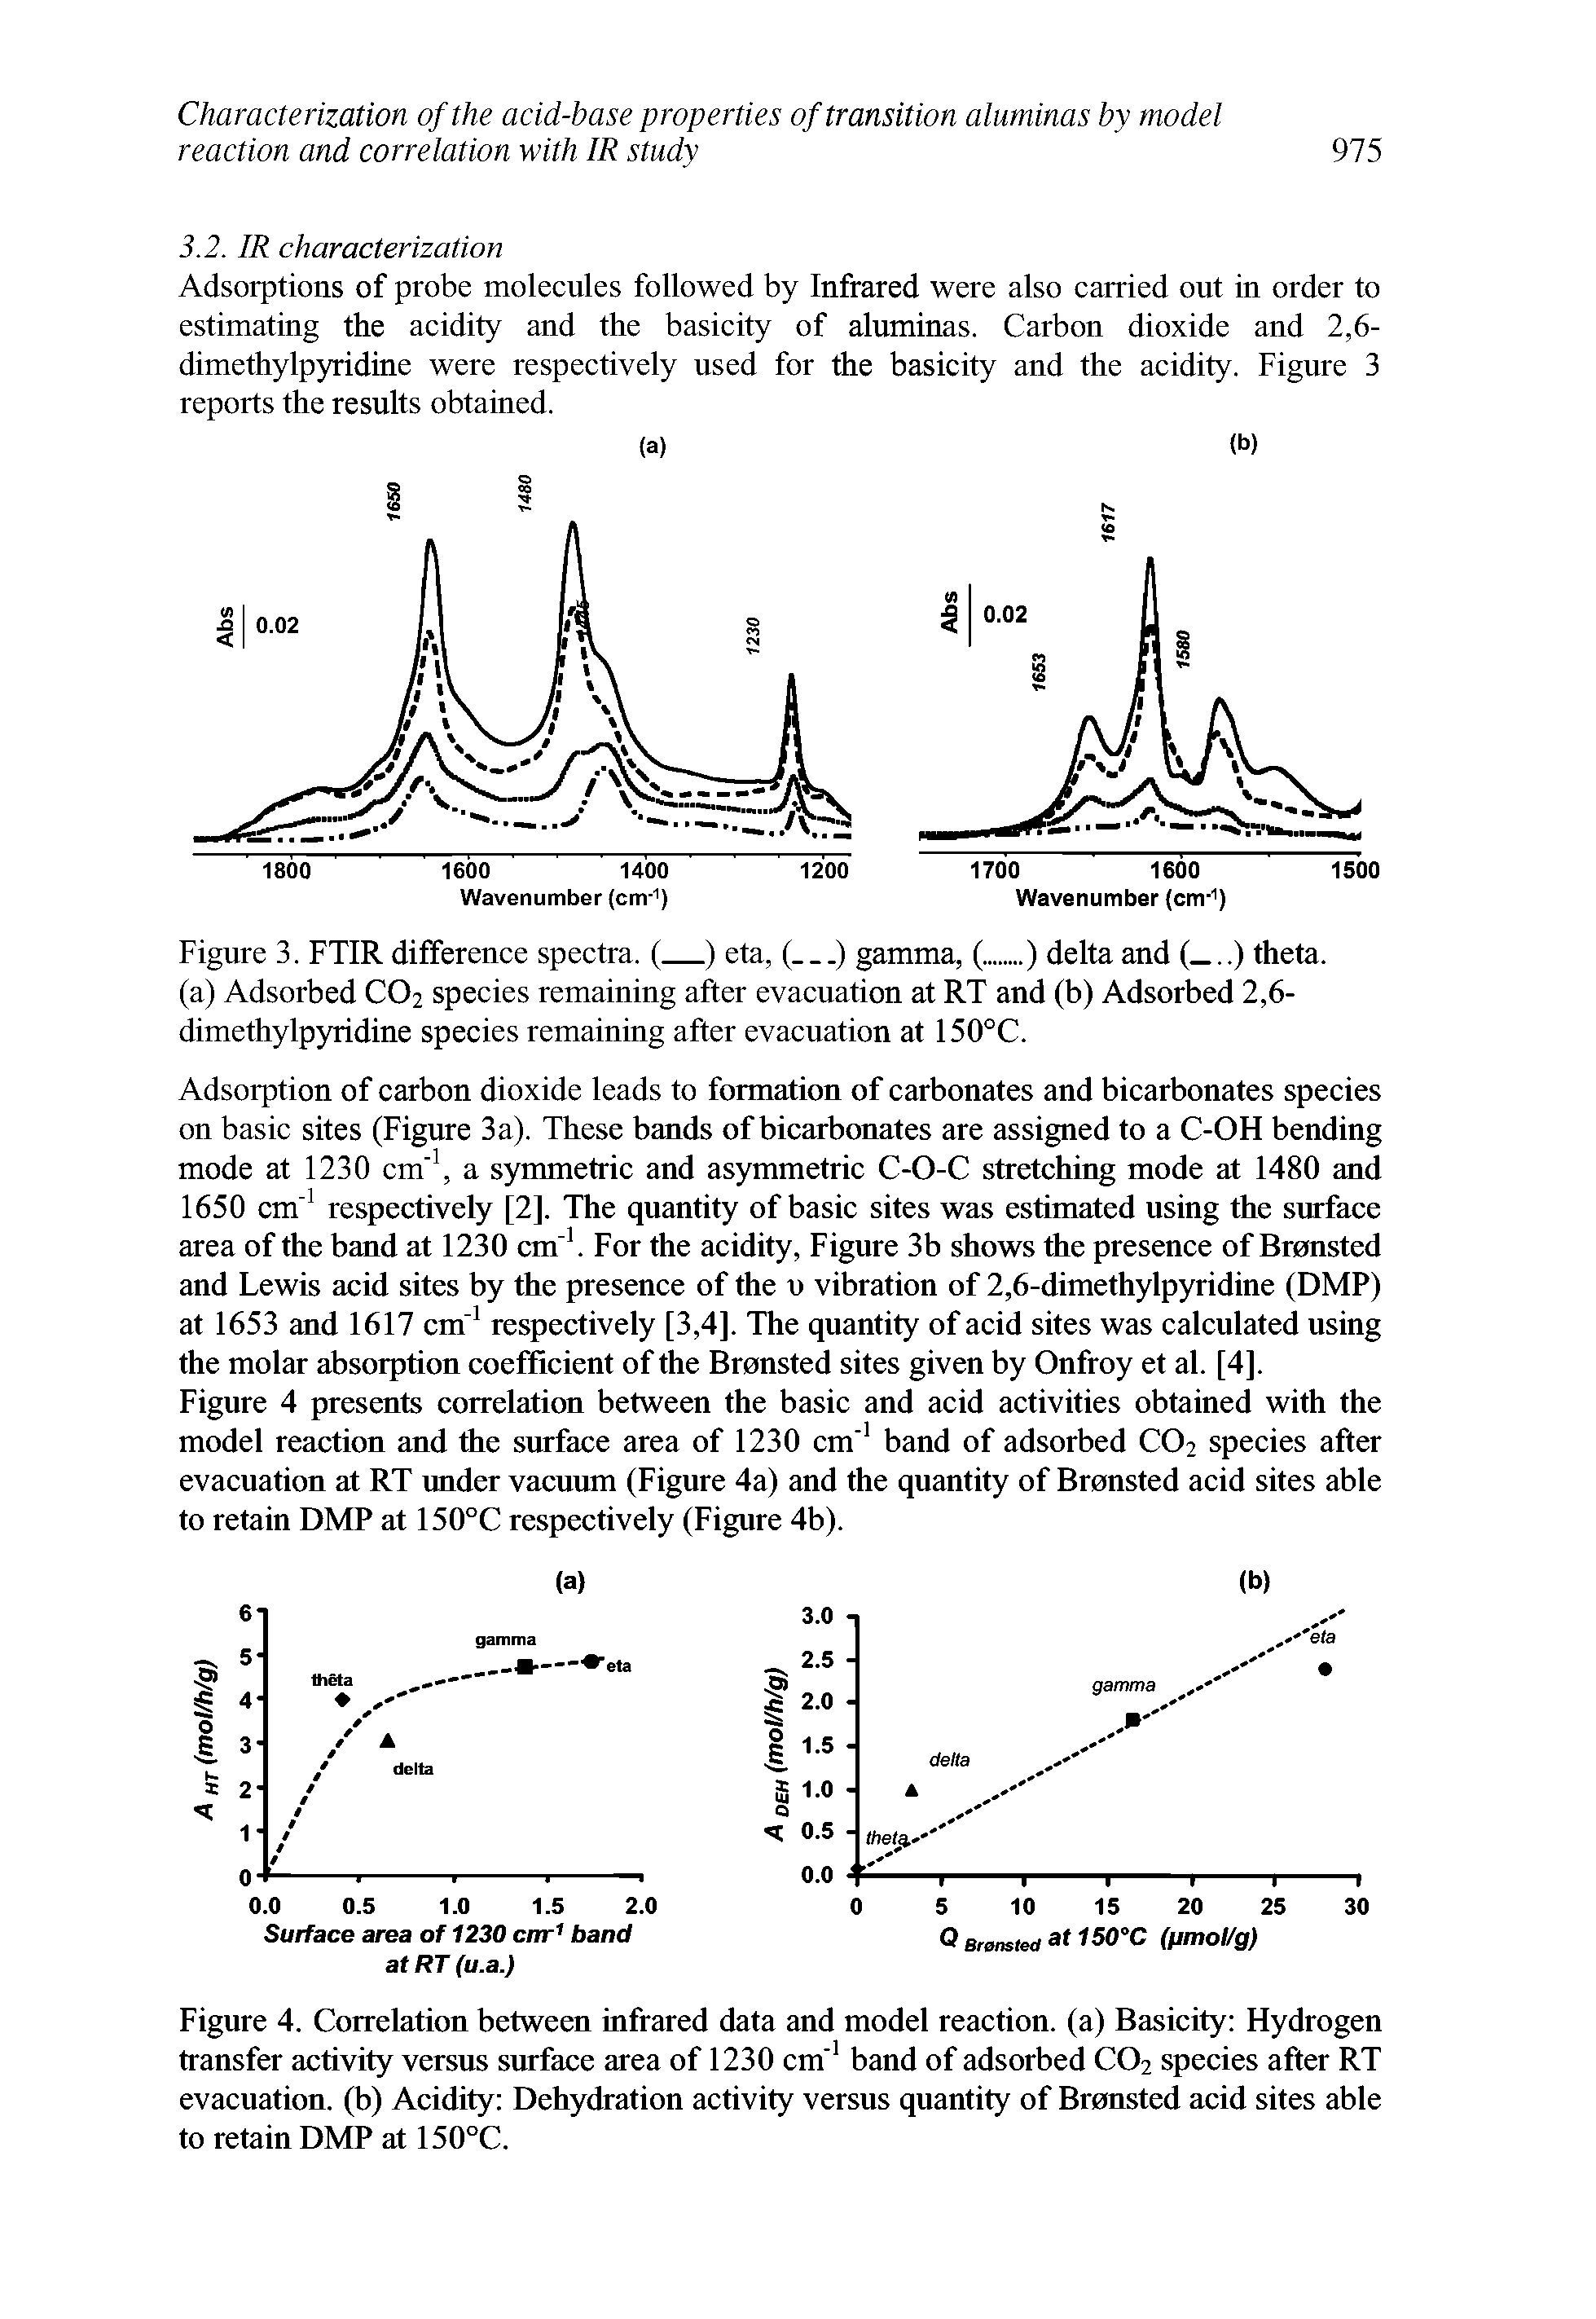 Figure 4. Correlation between infrared data and model reaction, (a) Basicity Hydrogen transfer activity versus surface area of 1230 cm 1 band of adsorbed C02 species after RT evacuation, (b) Acidity Dehydration activity versus quantity of Bronsted acid sites able to retain DMP at 150°C.